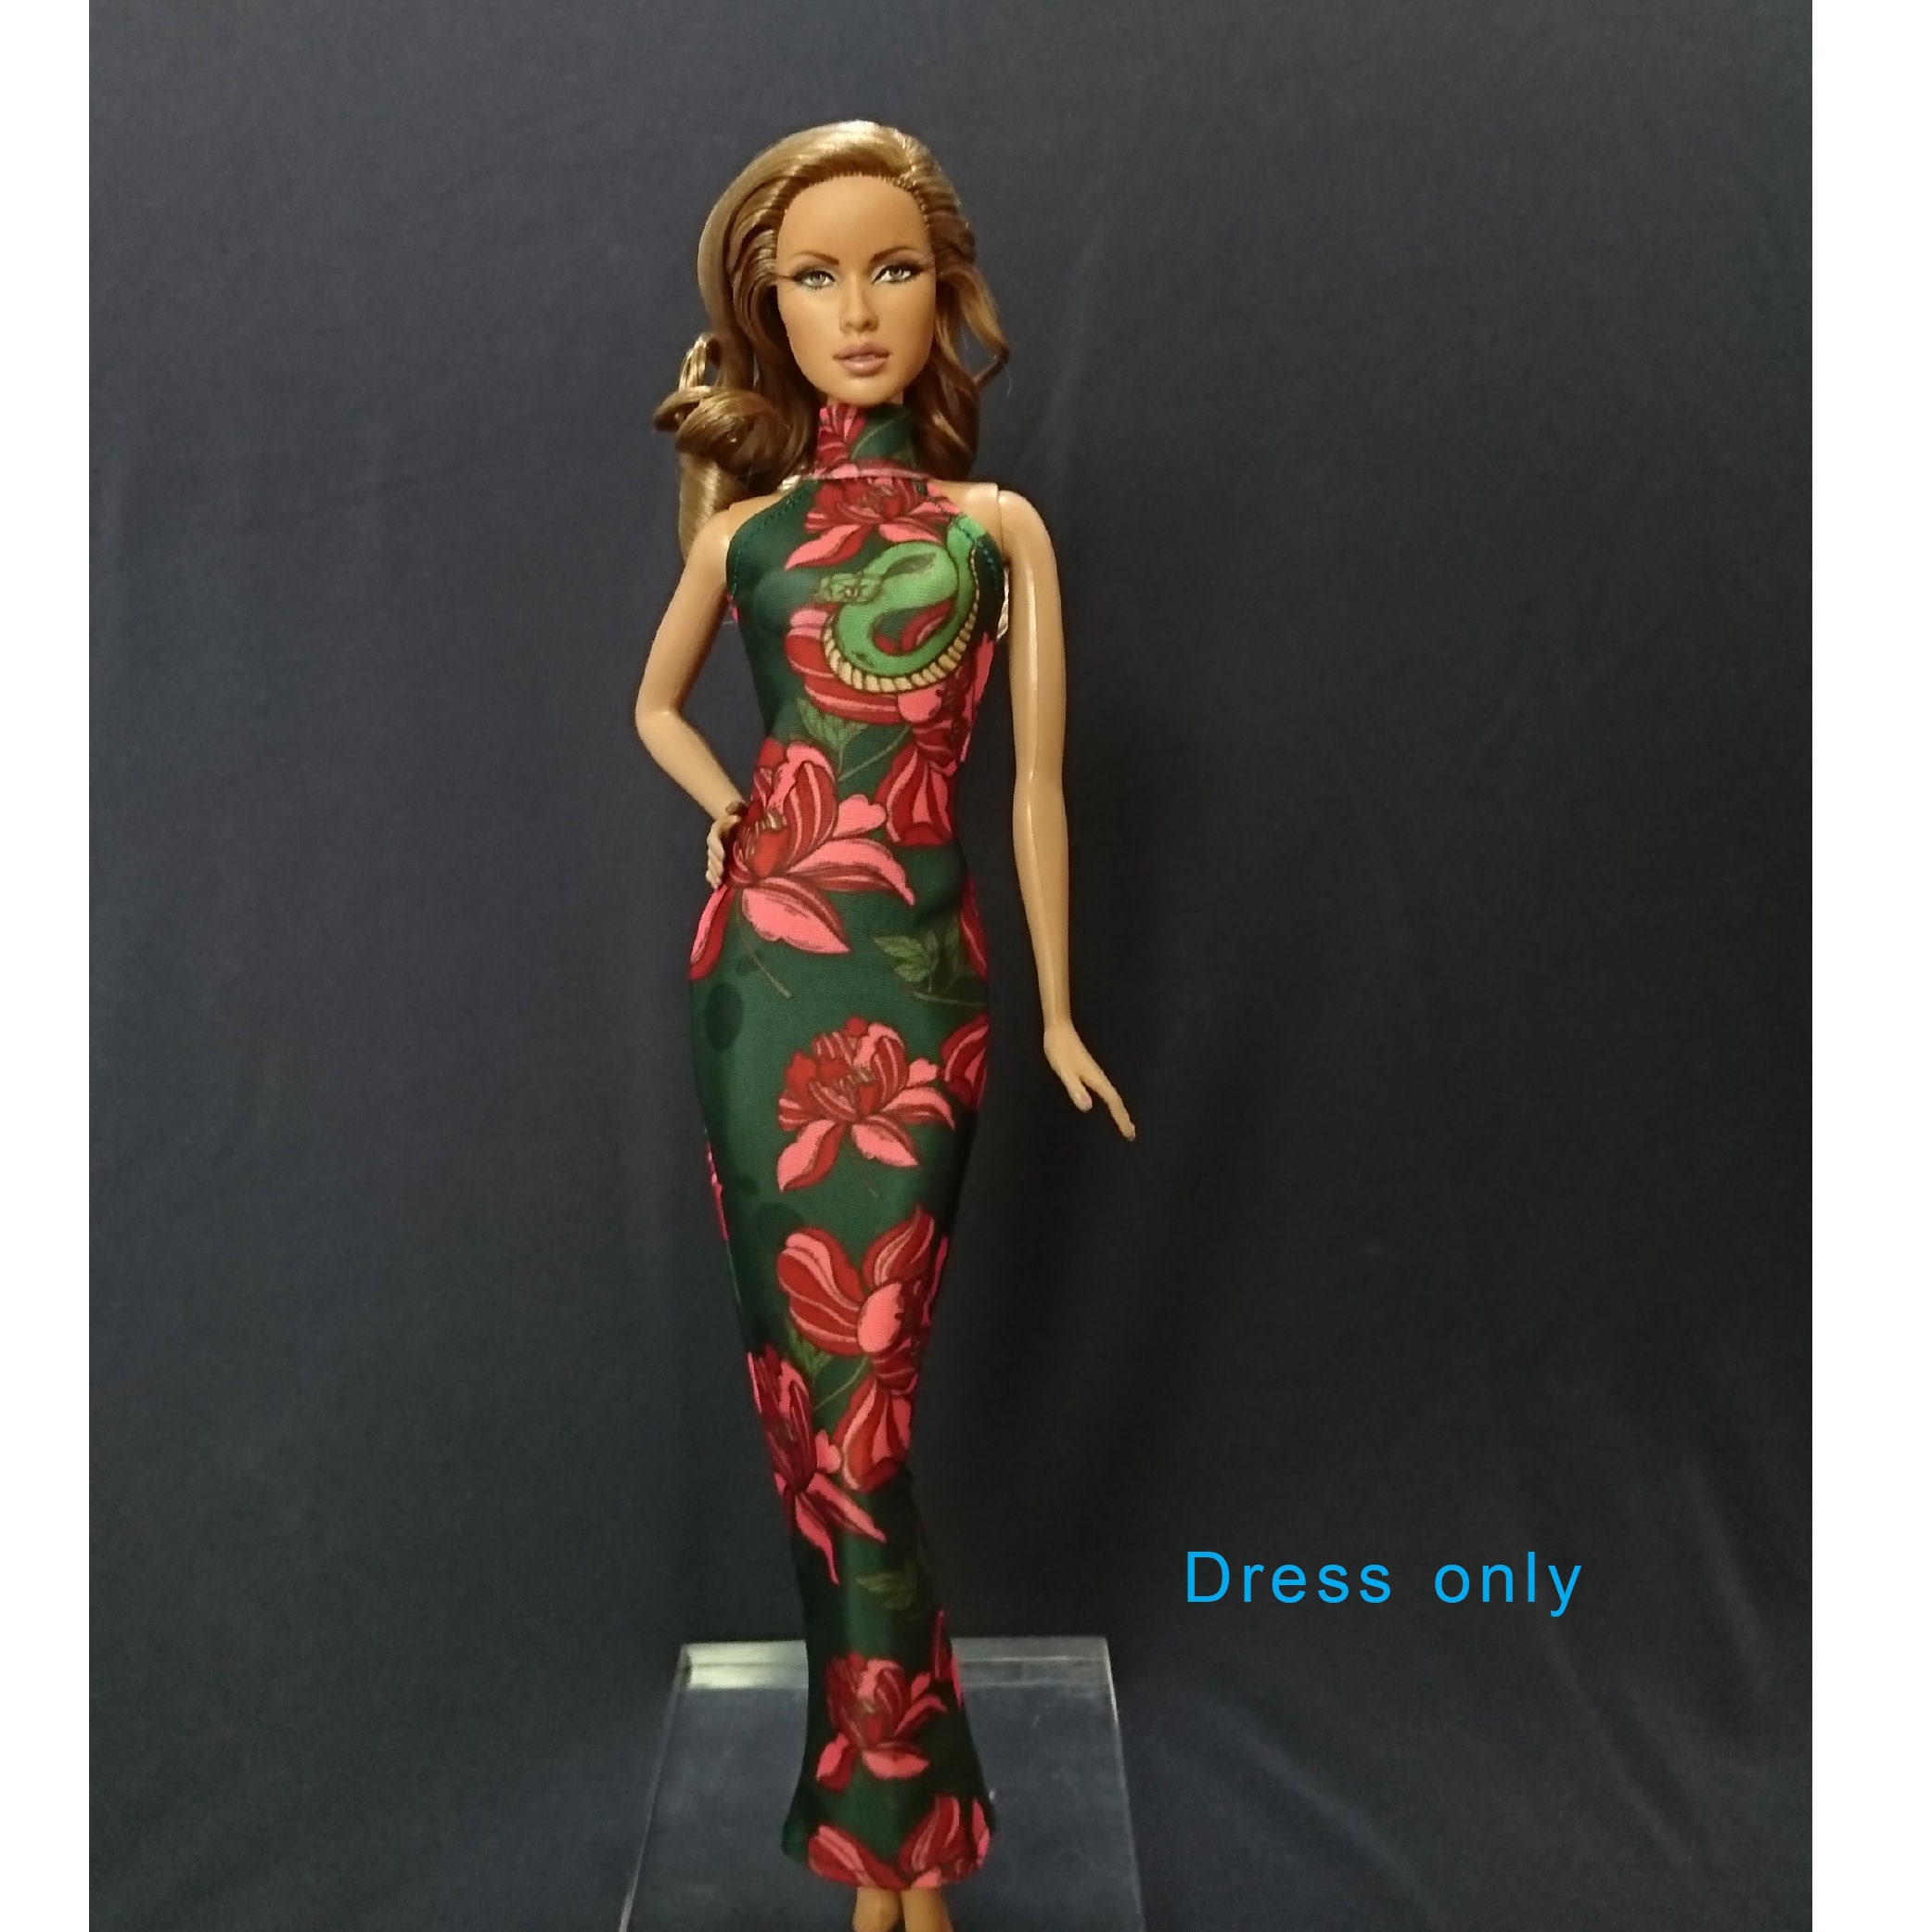 Barbie Model Muse Dress Outfit Wechselkleidung 